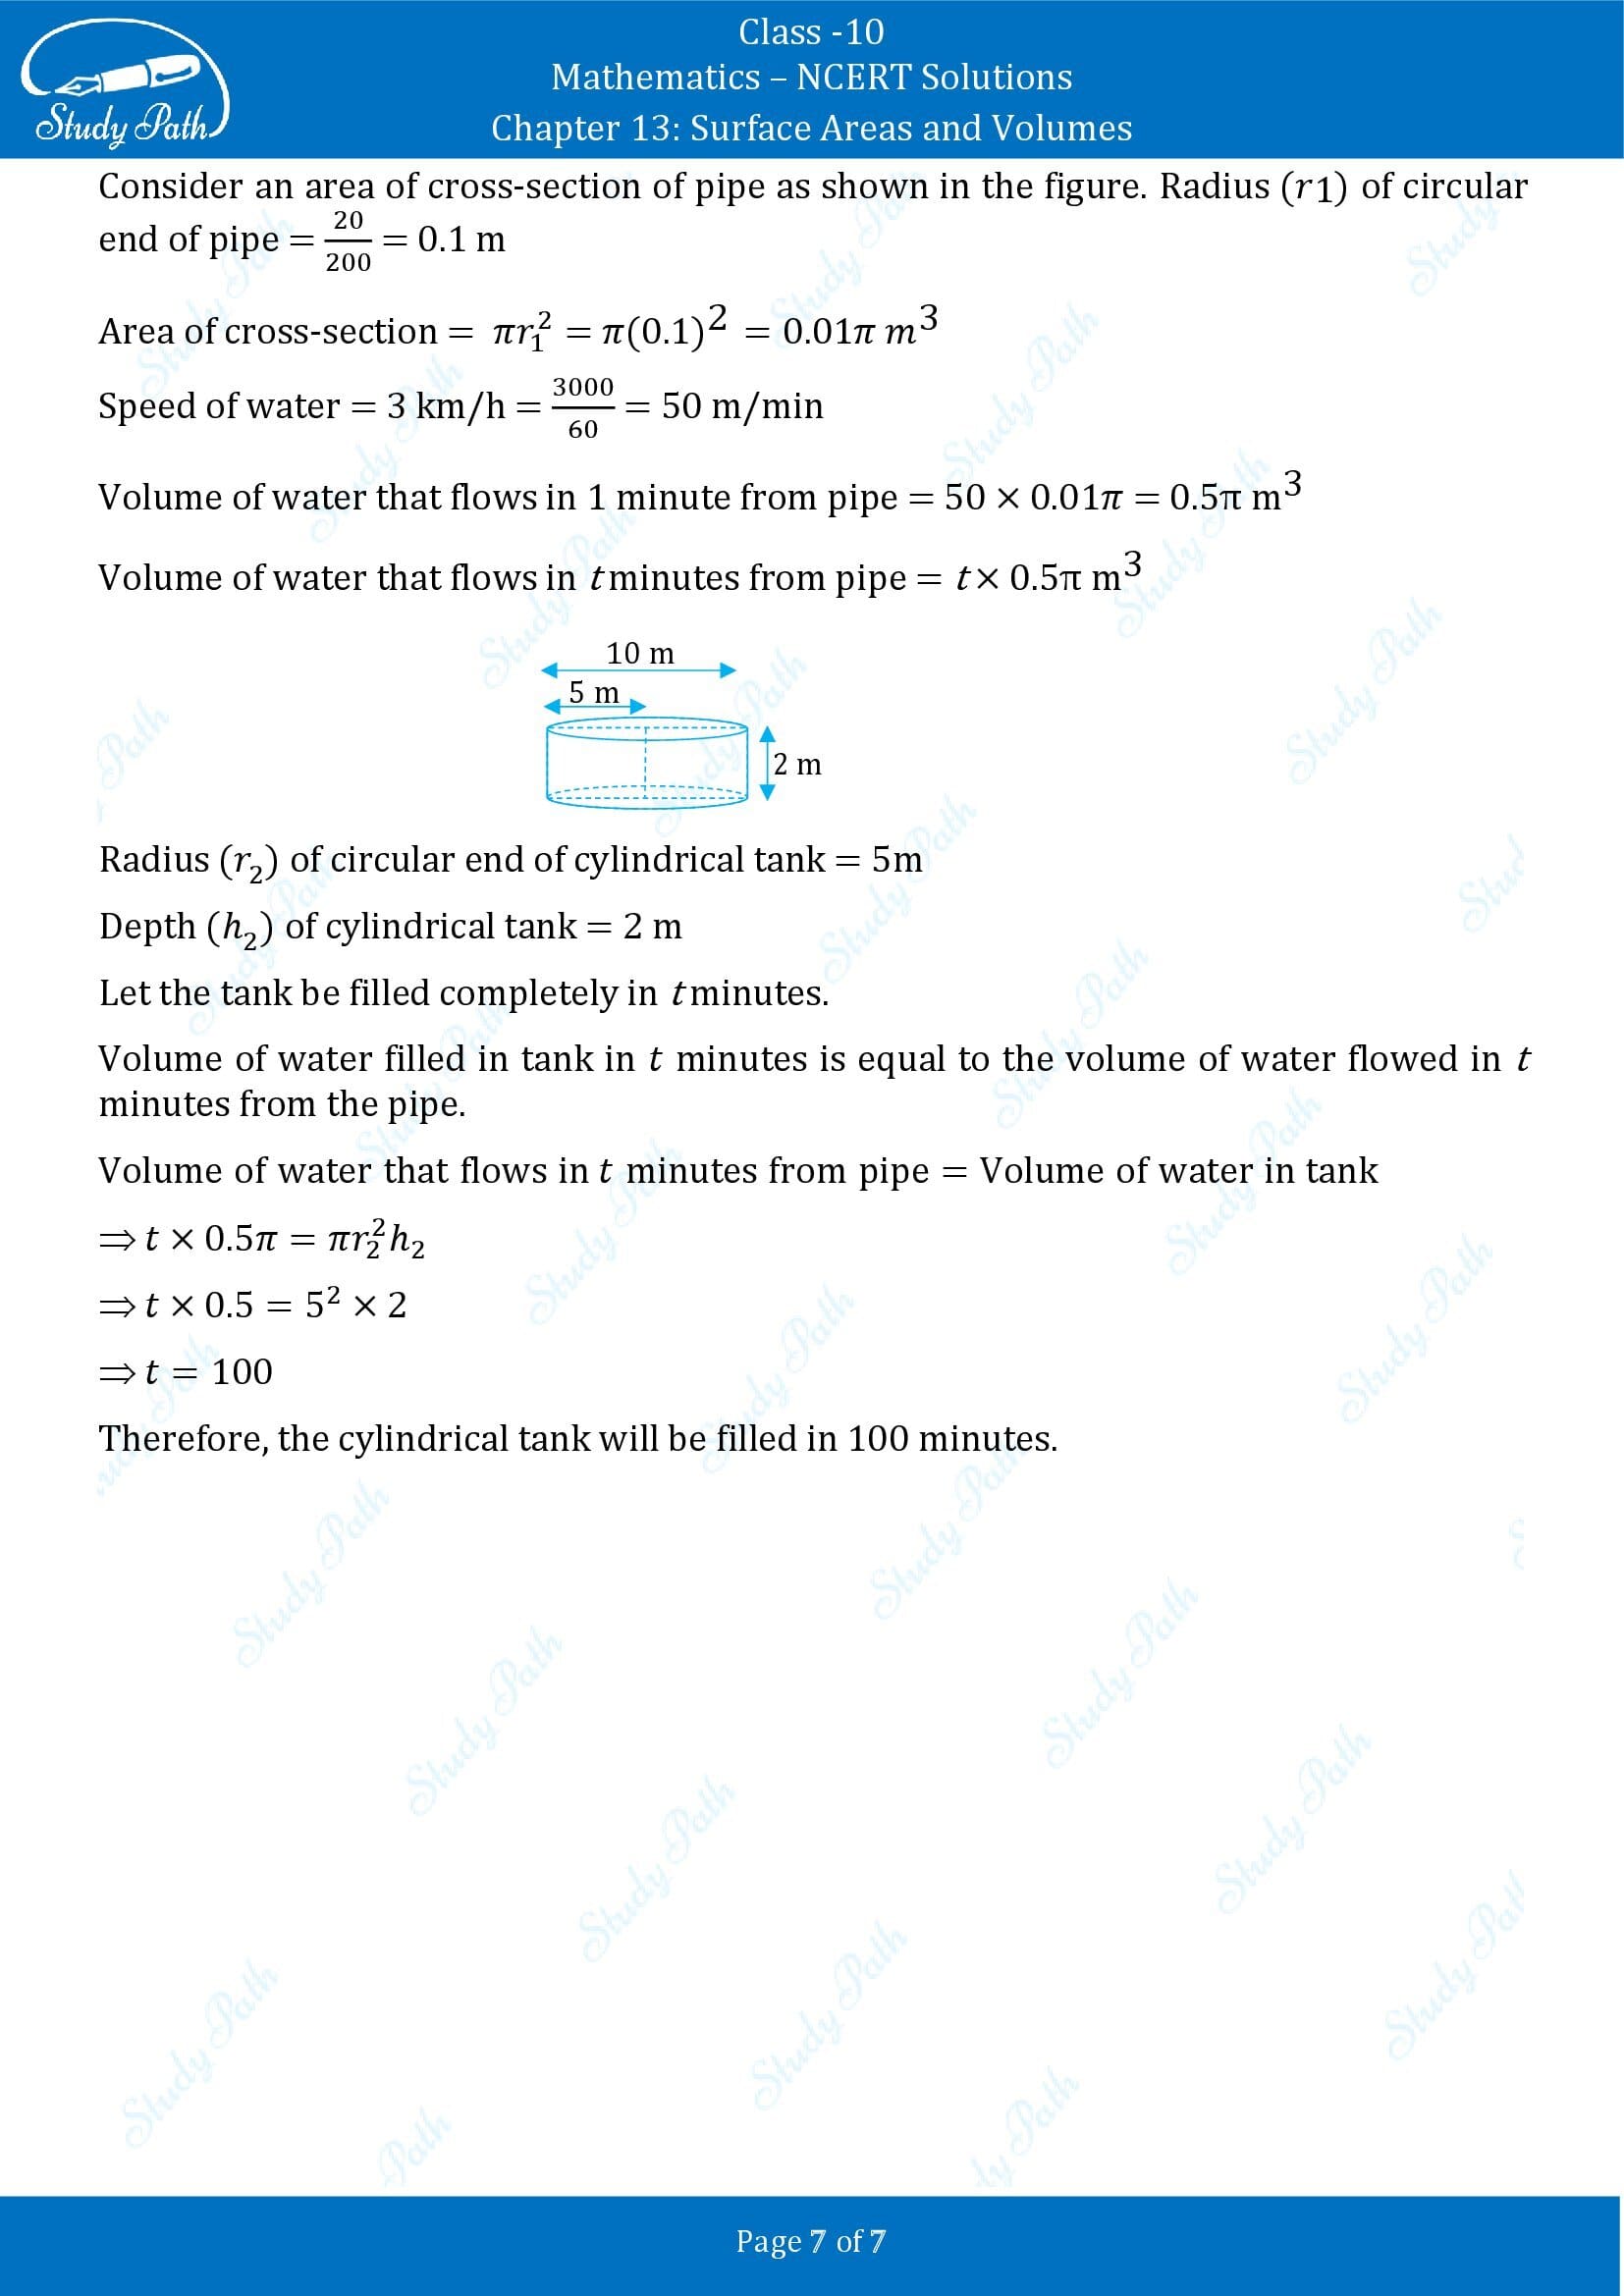 NCERT Solutions for Class 10 Maths Chapter 13 Surface Areas and Volumes Exercise 13.3 00007